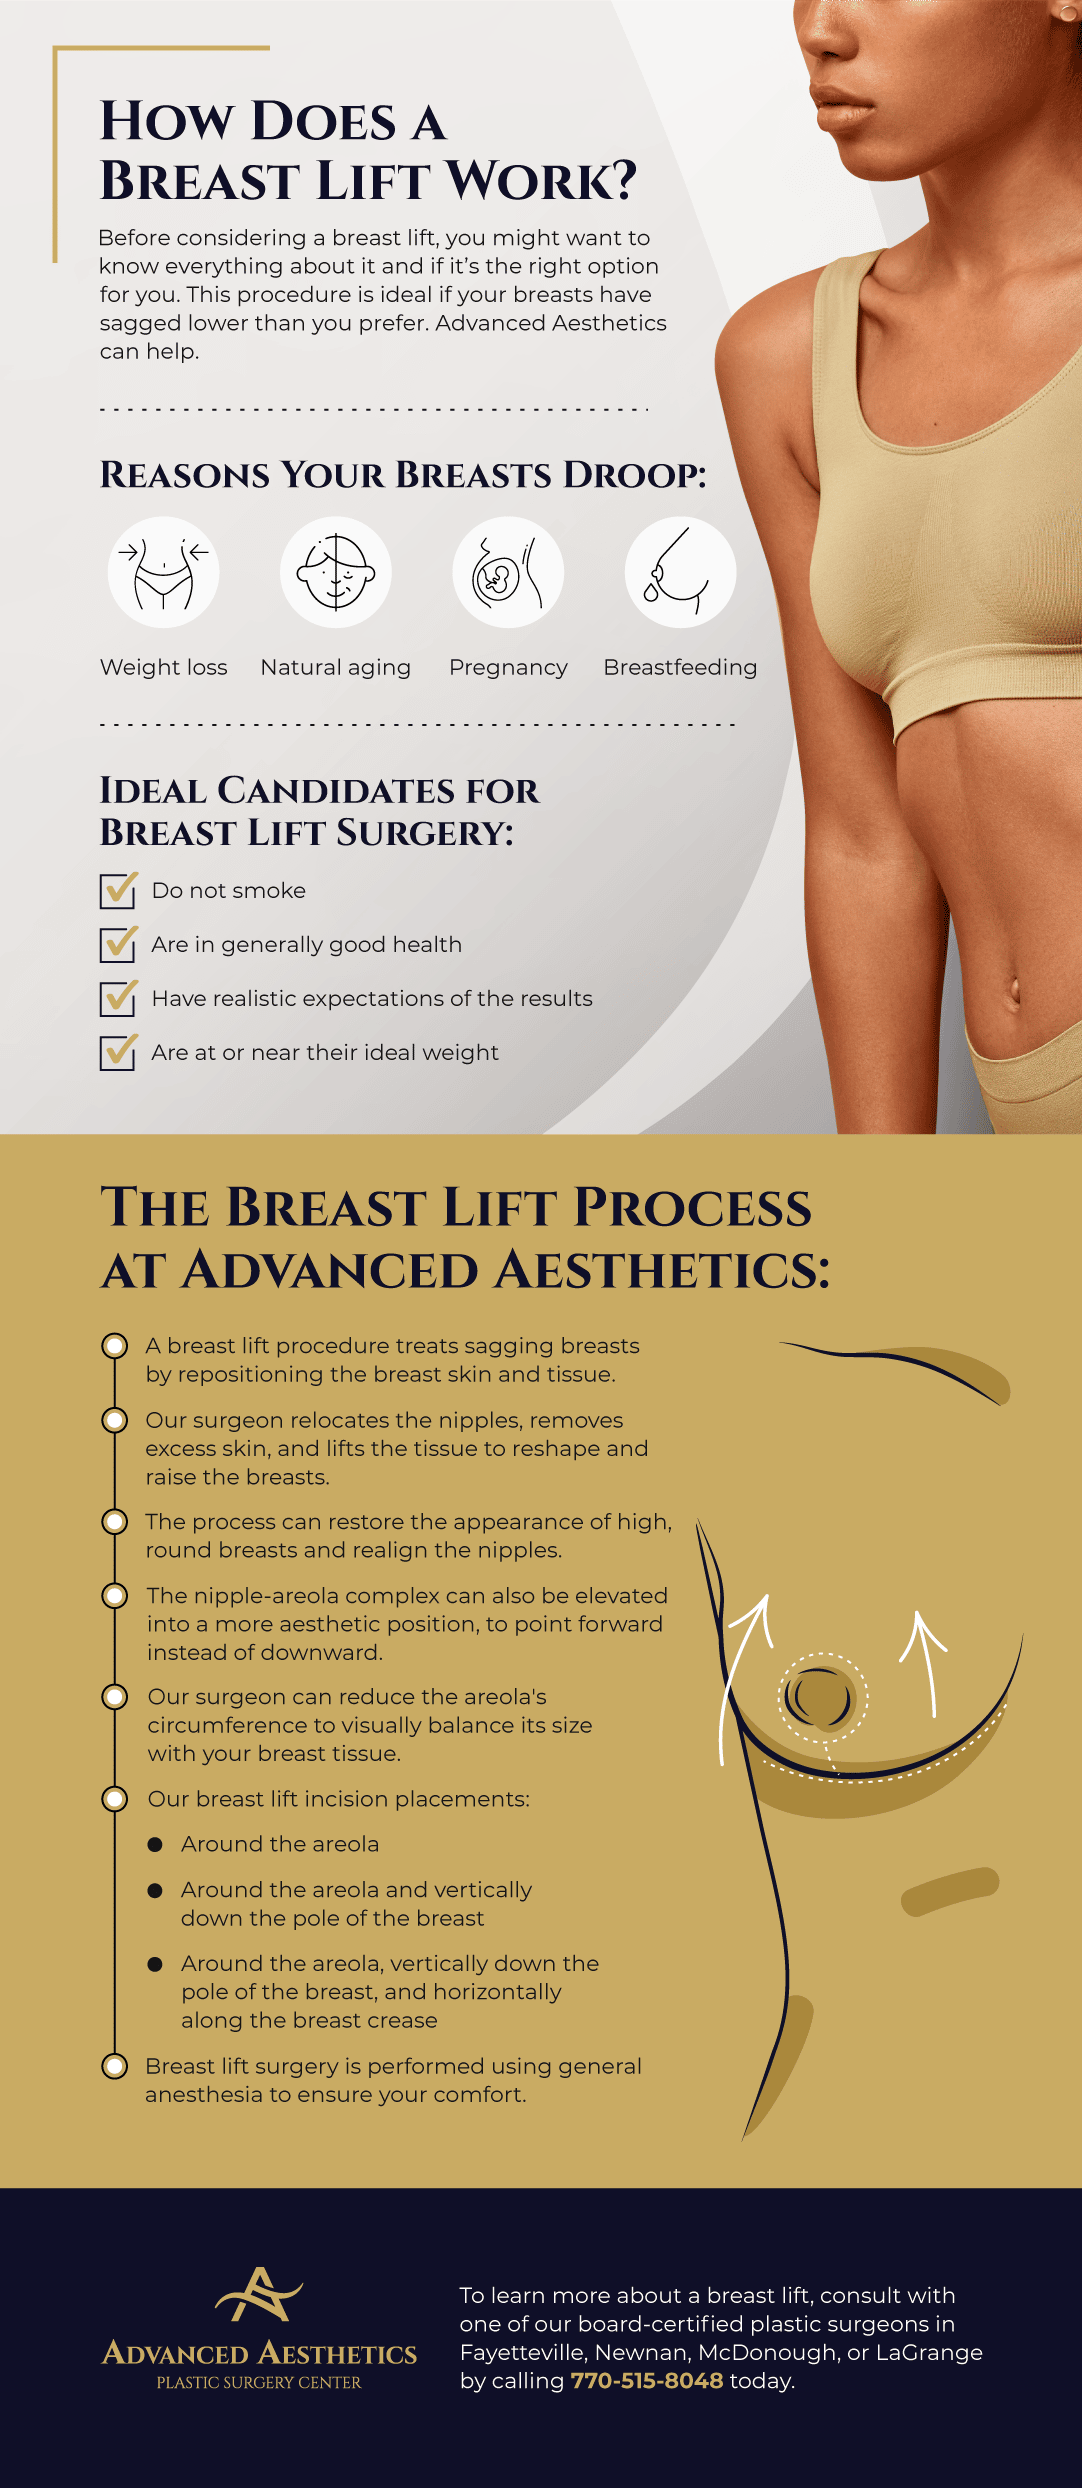 How Does a Breast Lift Work?